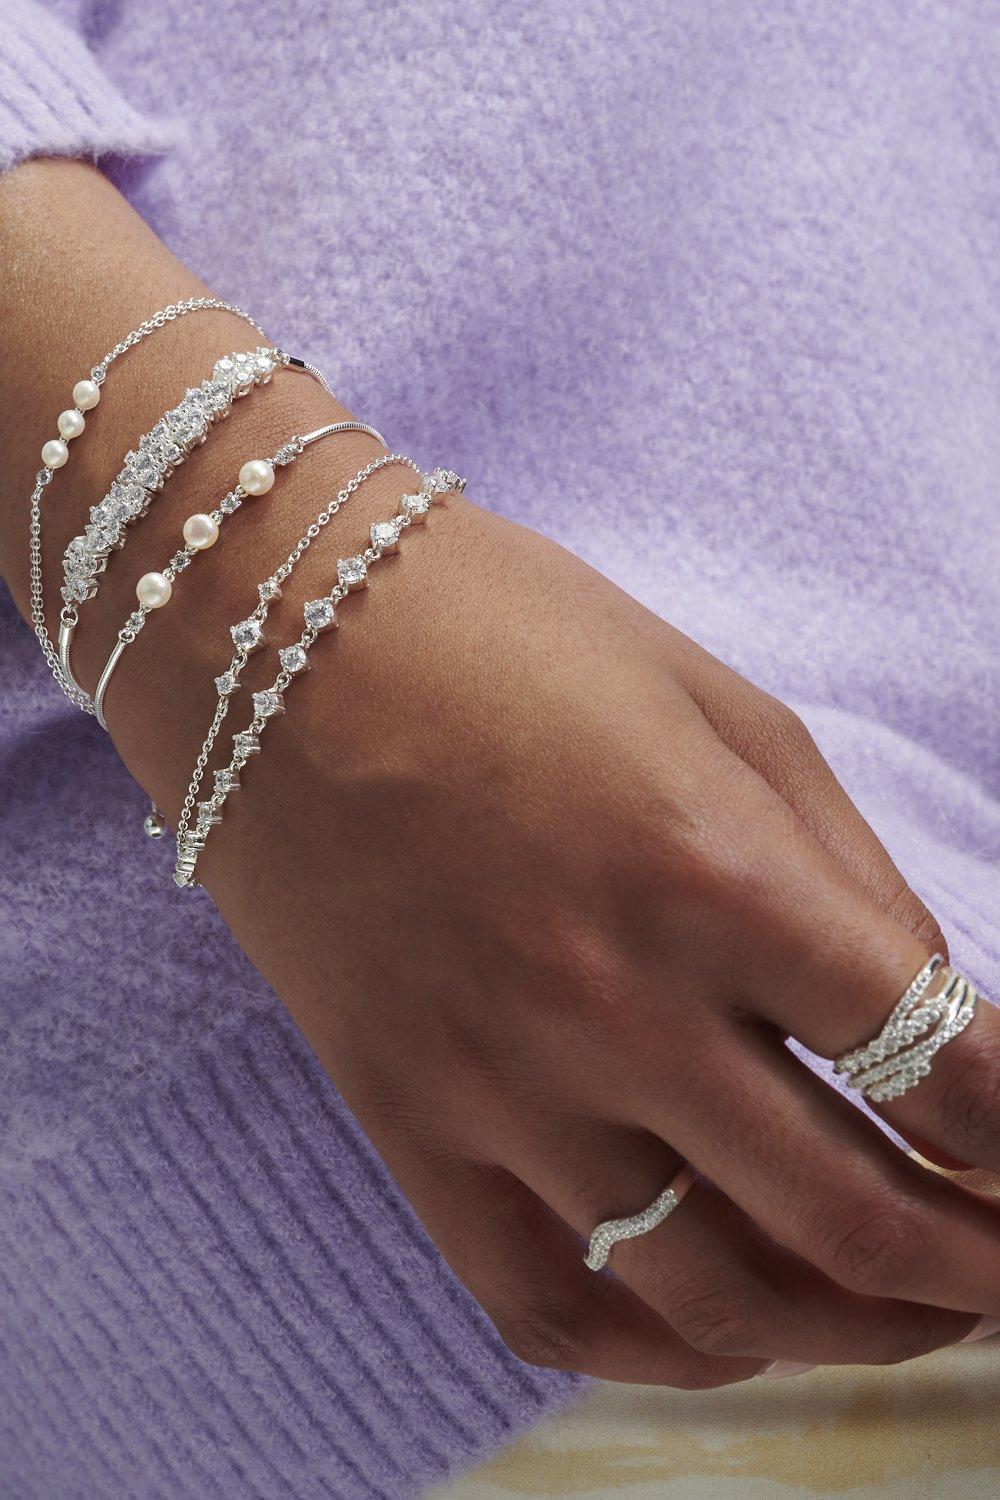 Jewellery | Sterling Silver 925 With Cubic Zirconia Tri Stone Bracelet |  Simply Silver